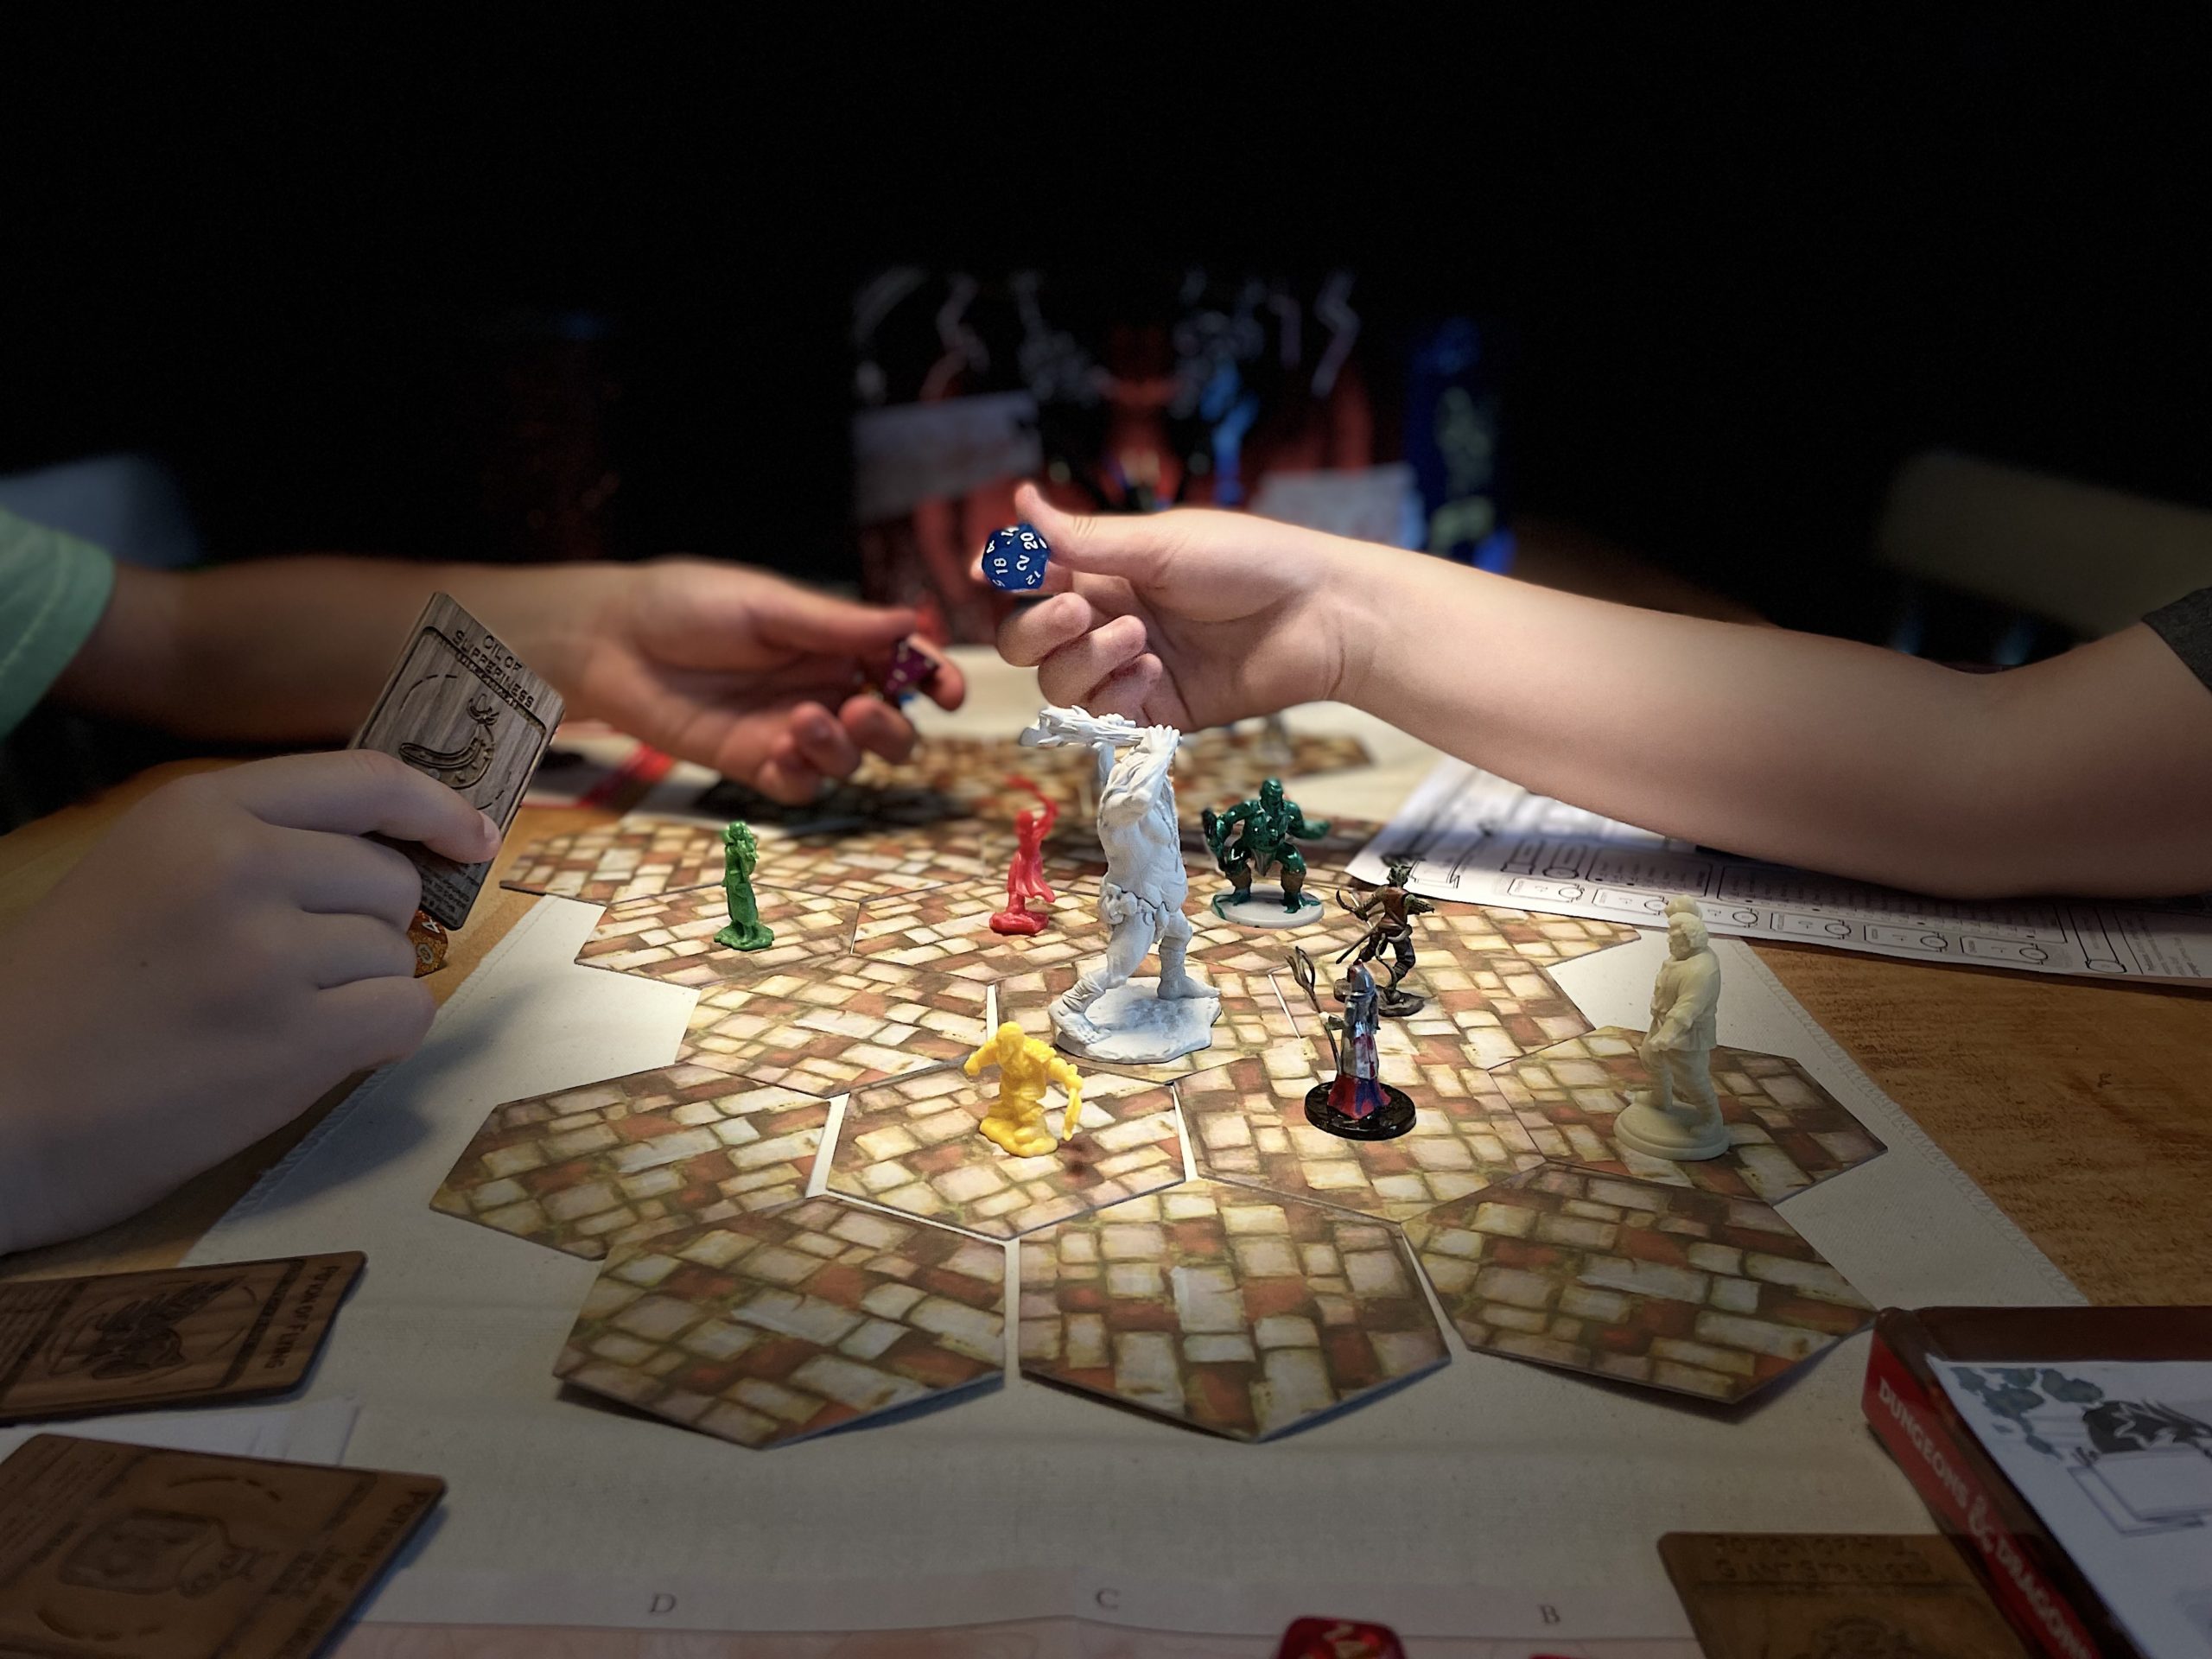 A board game set up on a table with pawns